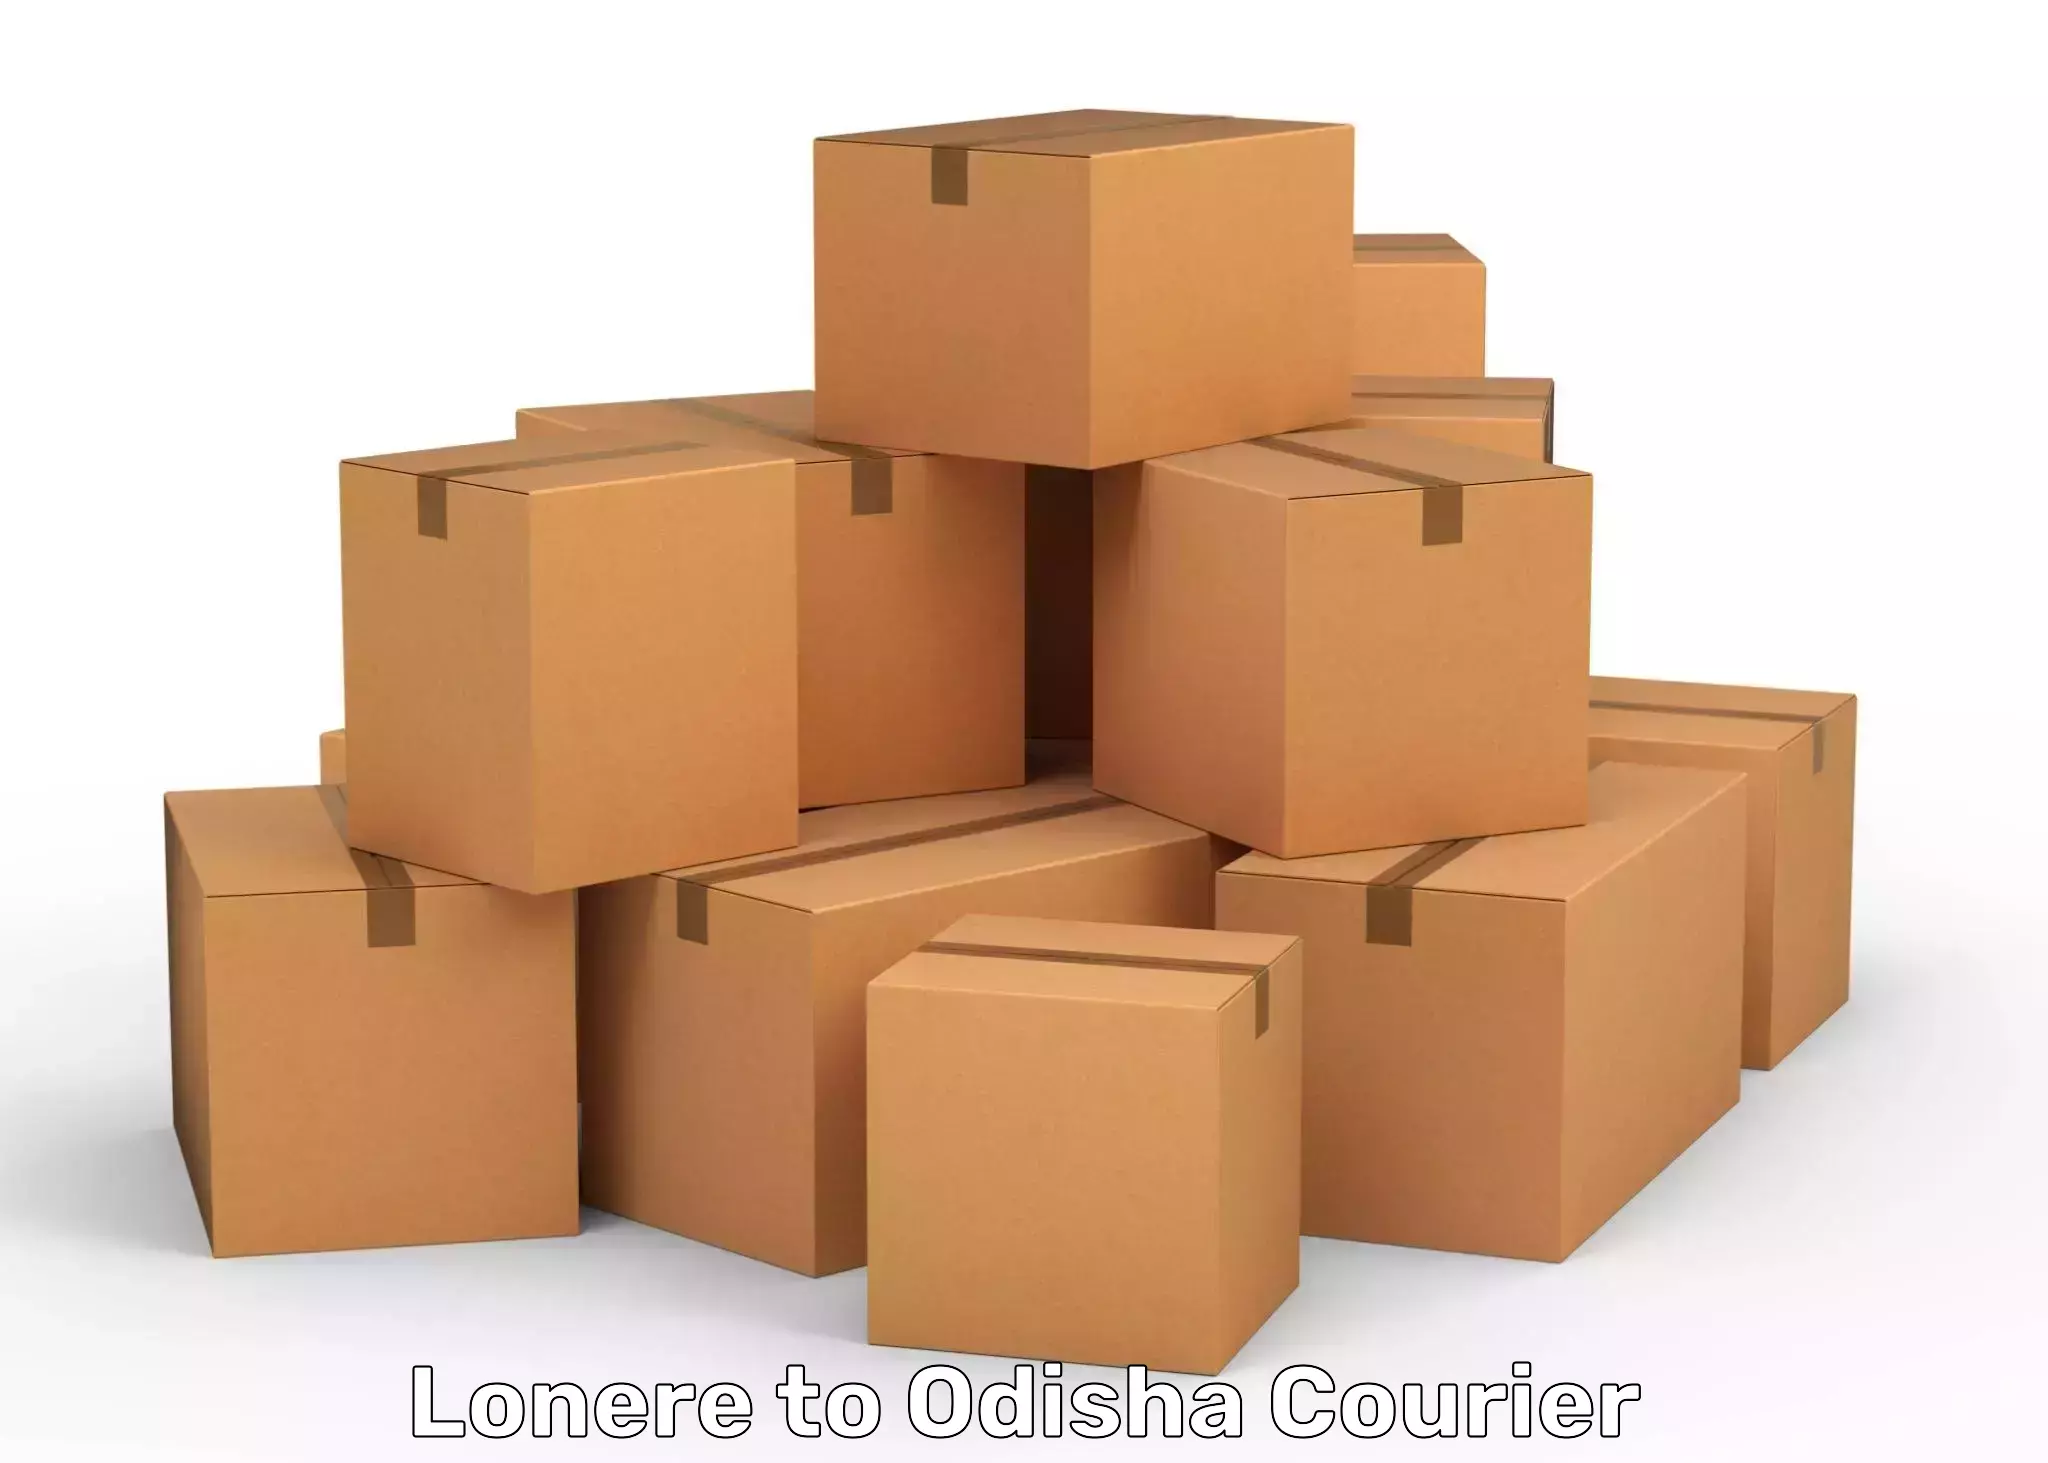 User-friendly courier app Lonere to Odisha